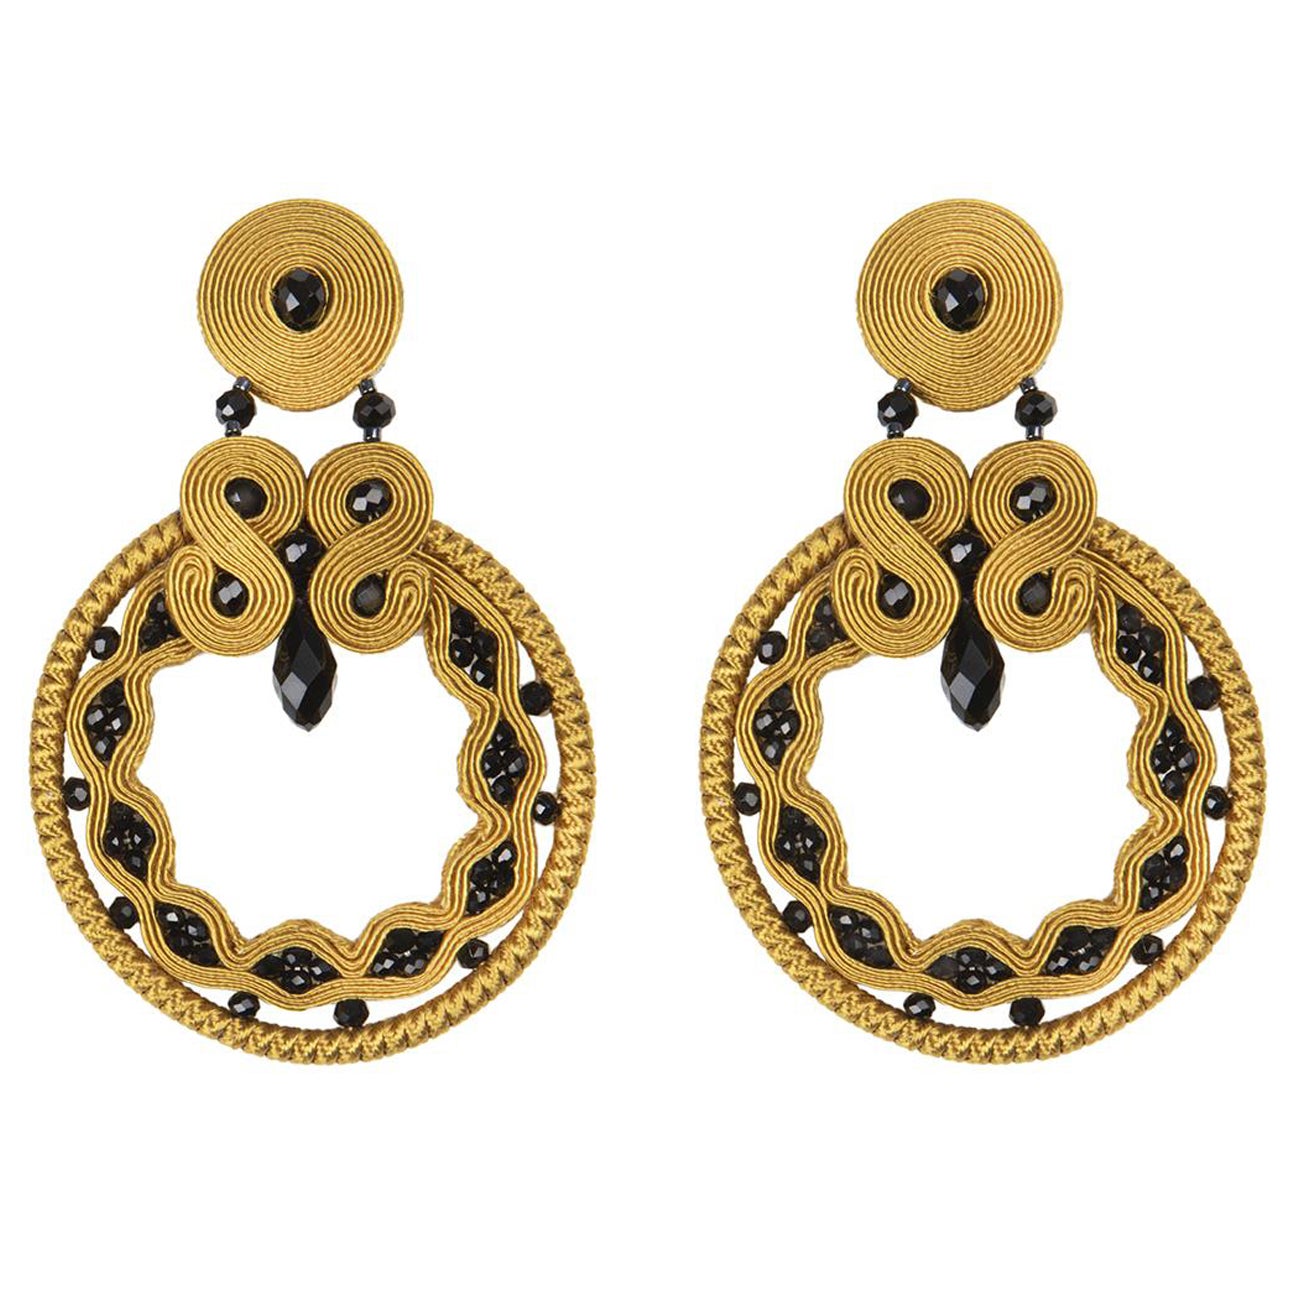 Ocher & Jet Soutache Earrings with Silk Rayon, Crystal Beads & Silver Closure For Sale